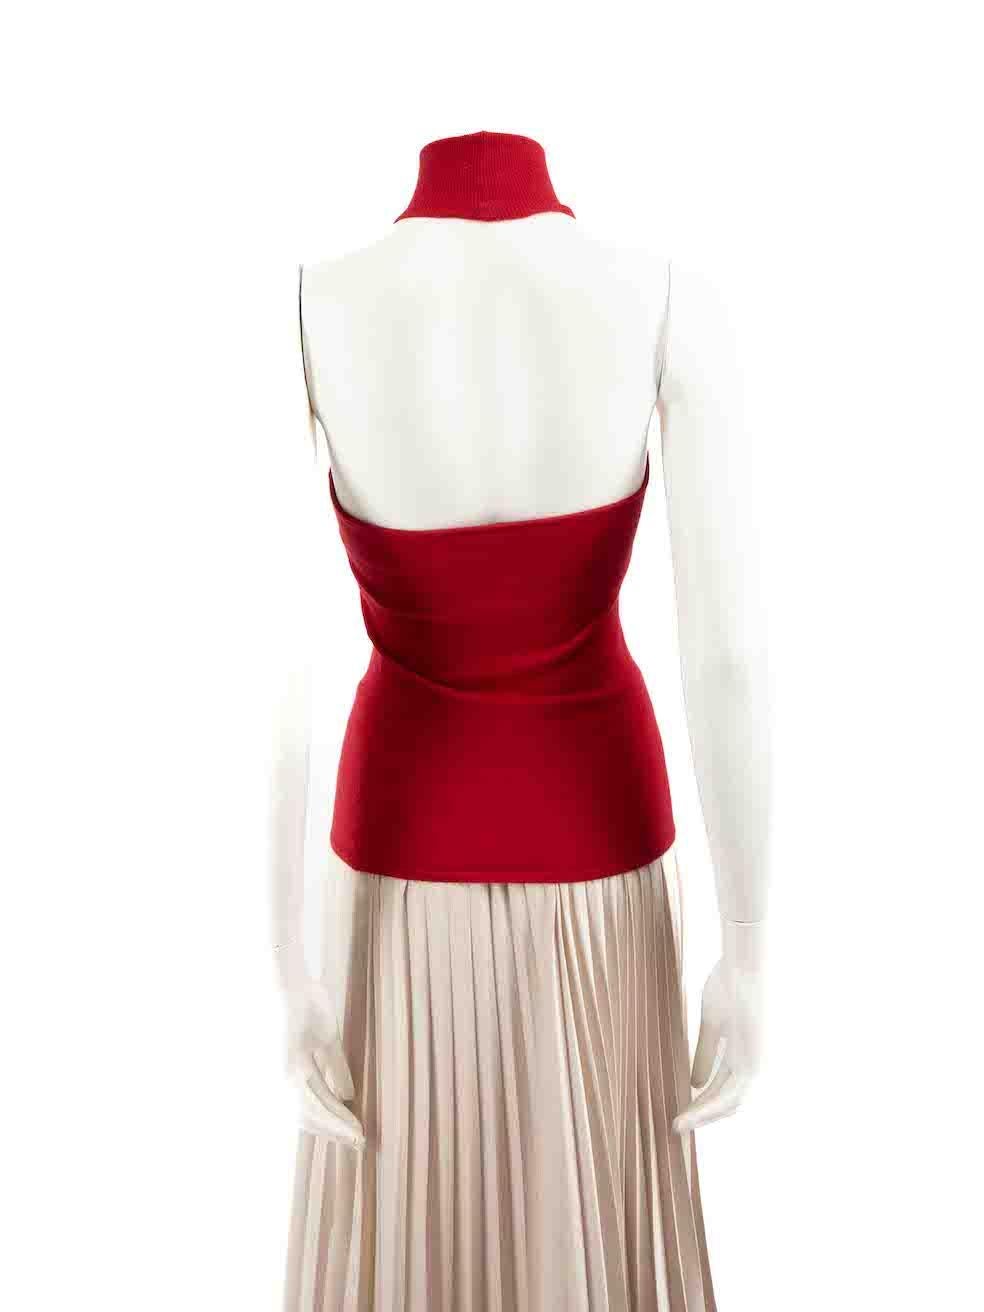 Ralph Lauren Red Cashmere Sleeveless Top Size S In Excellent Condition For Sale In London, GB